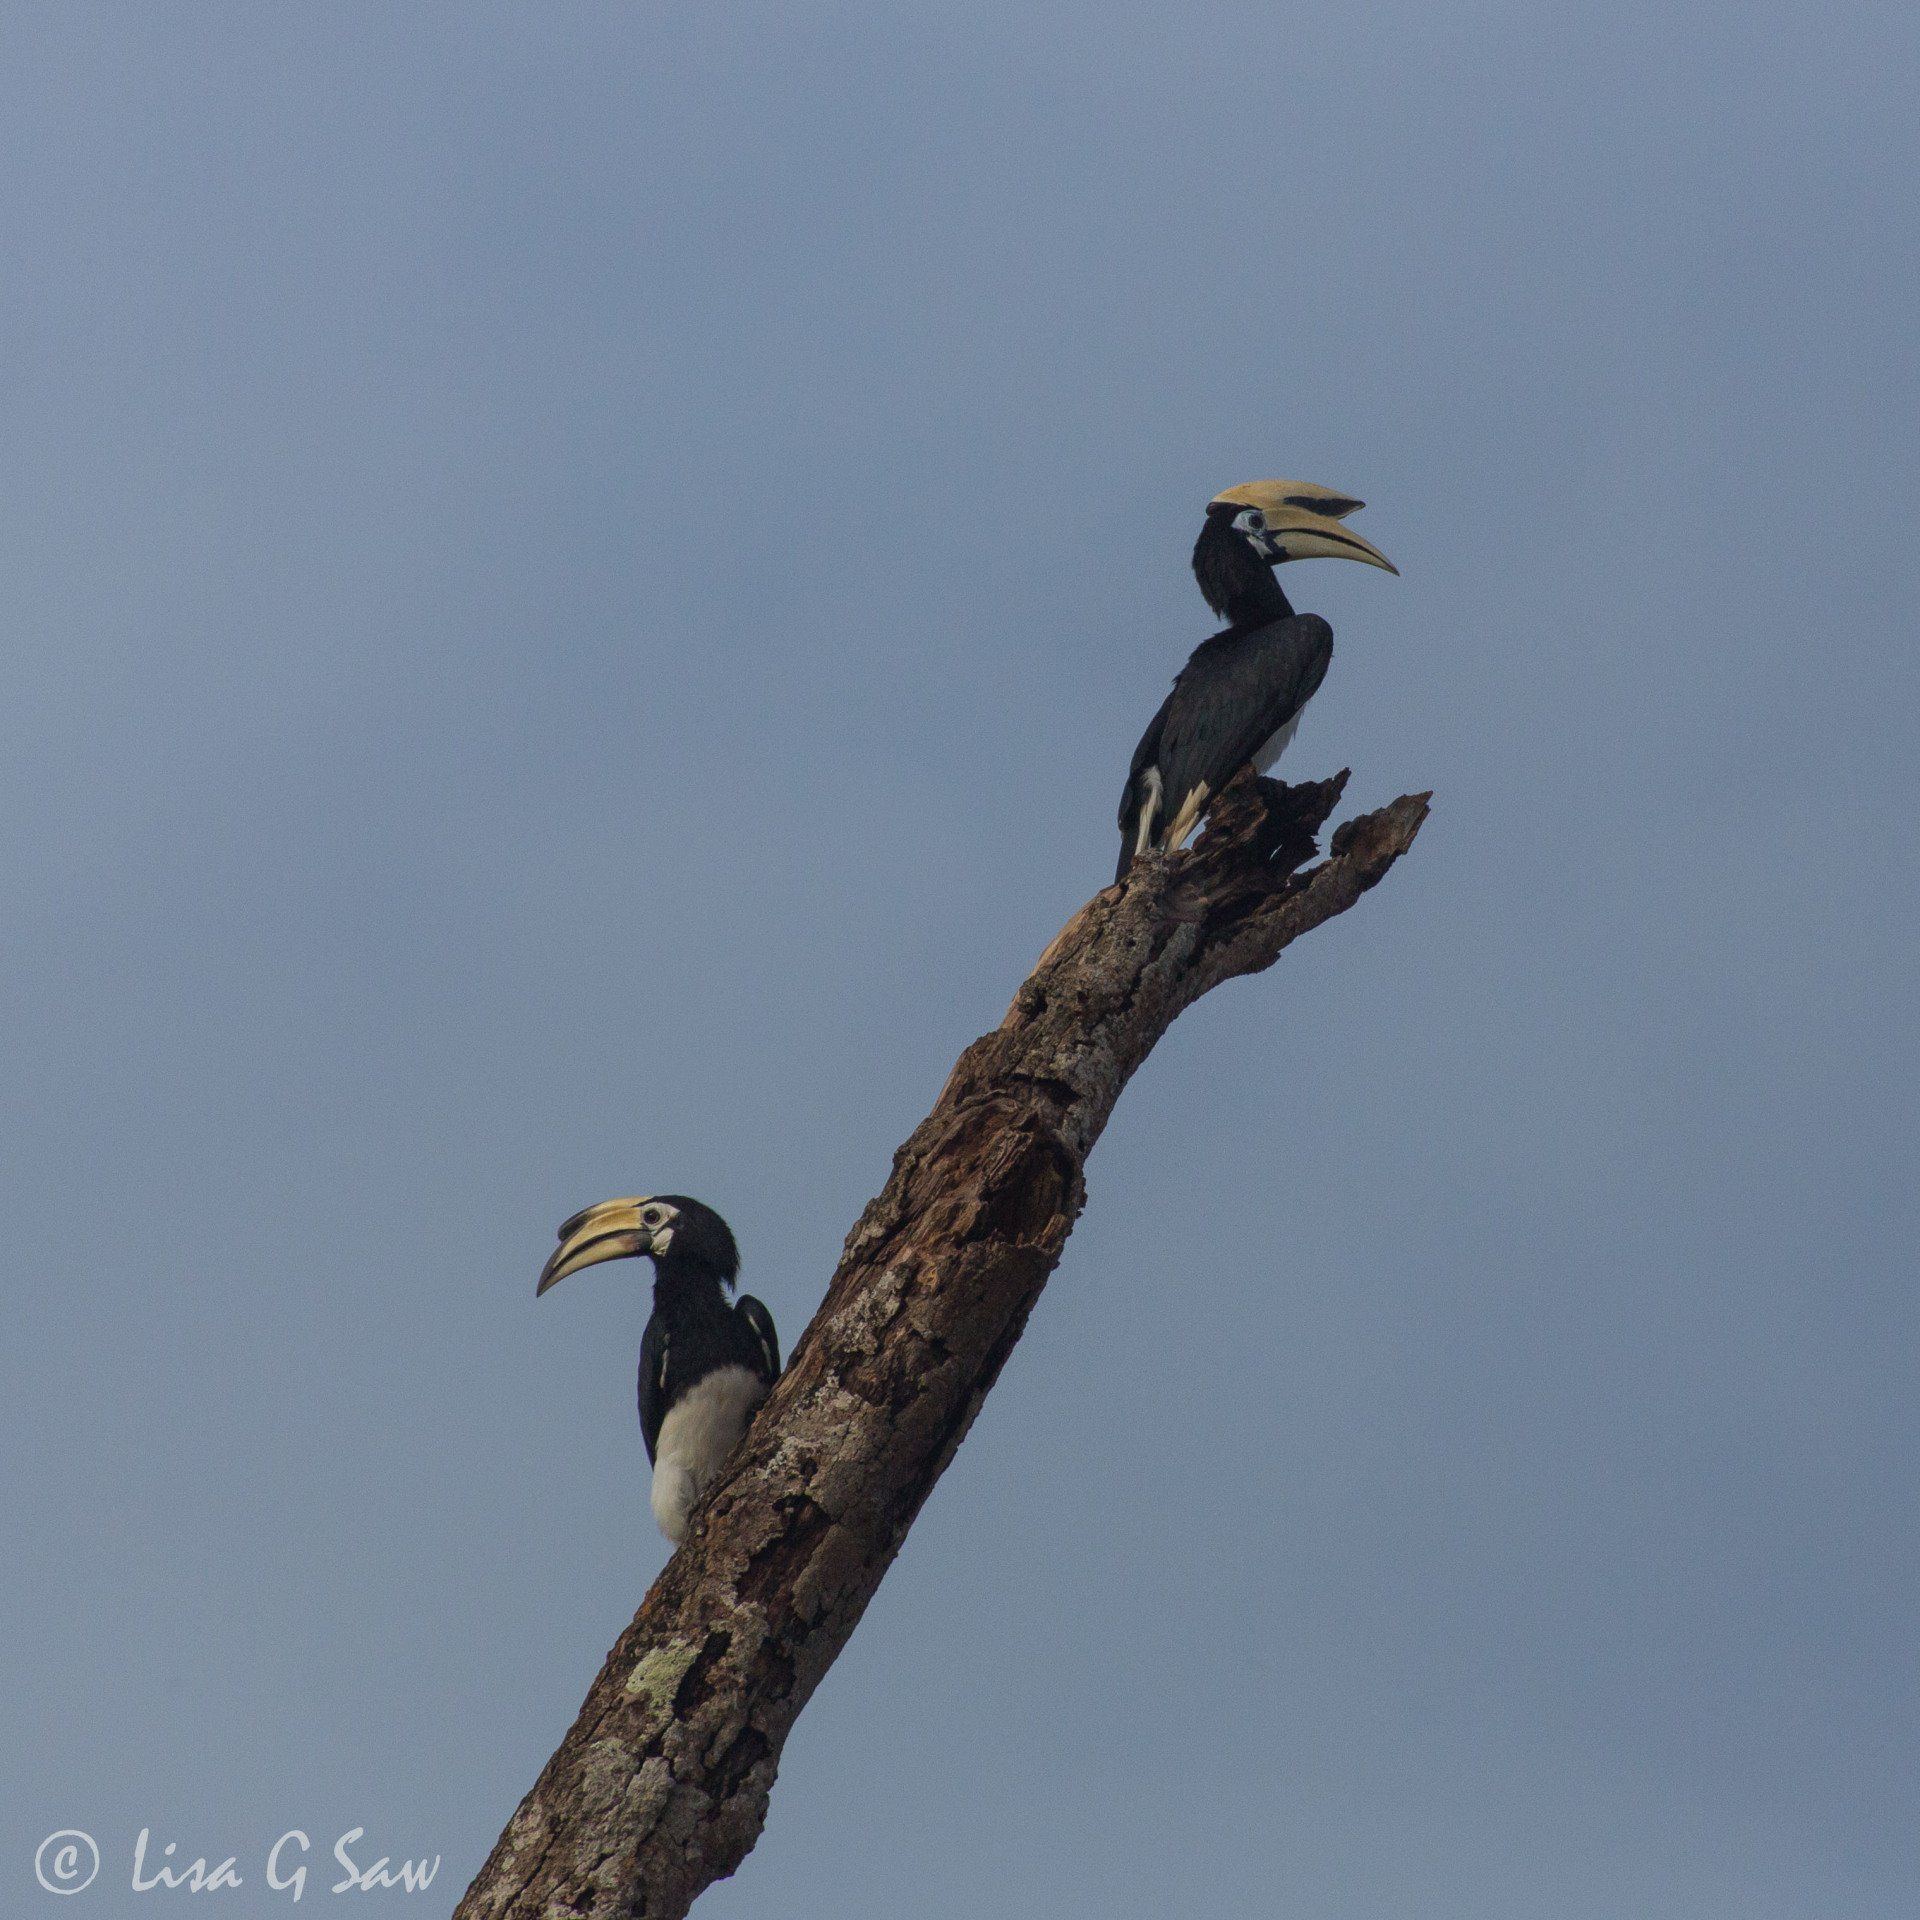 Two Oriental Pied Hornbills facing opposite directions on a branch